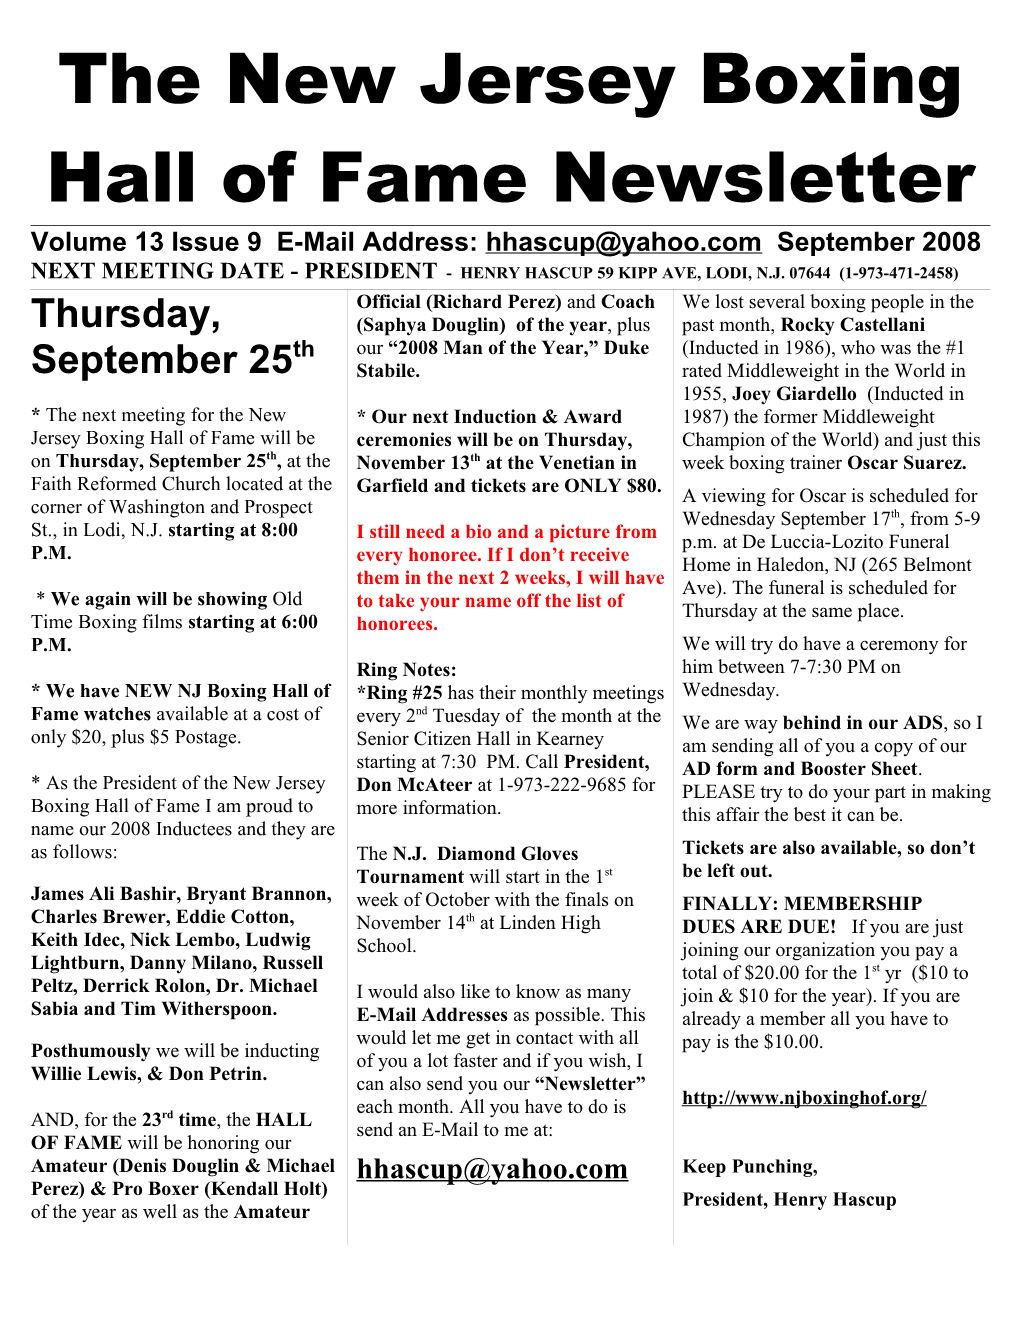 The New Jersey Boxing Hall of Fame Newsletter s2